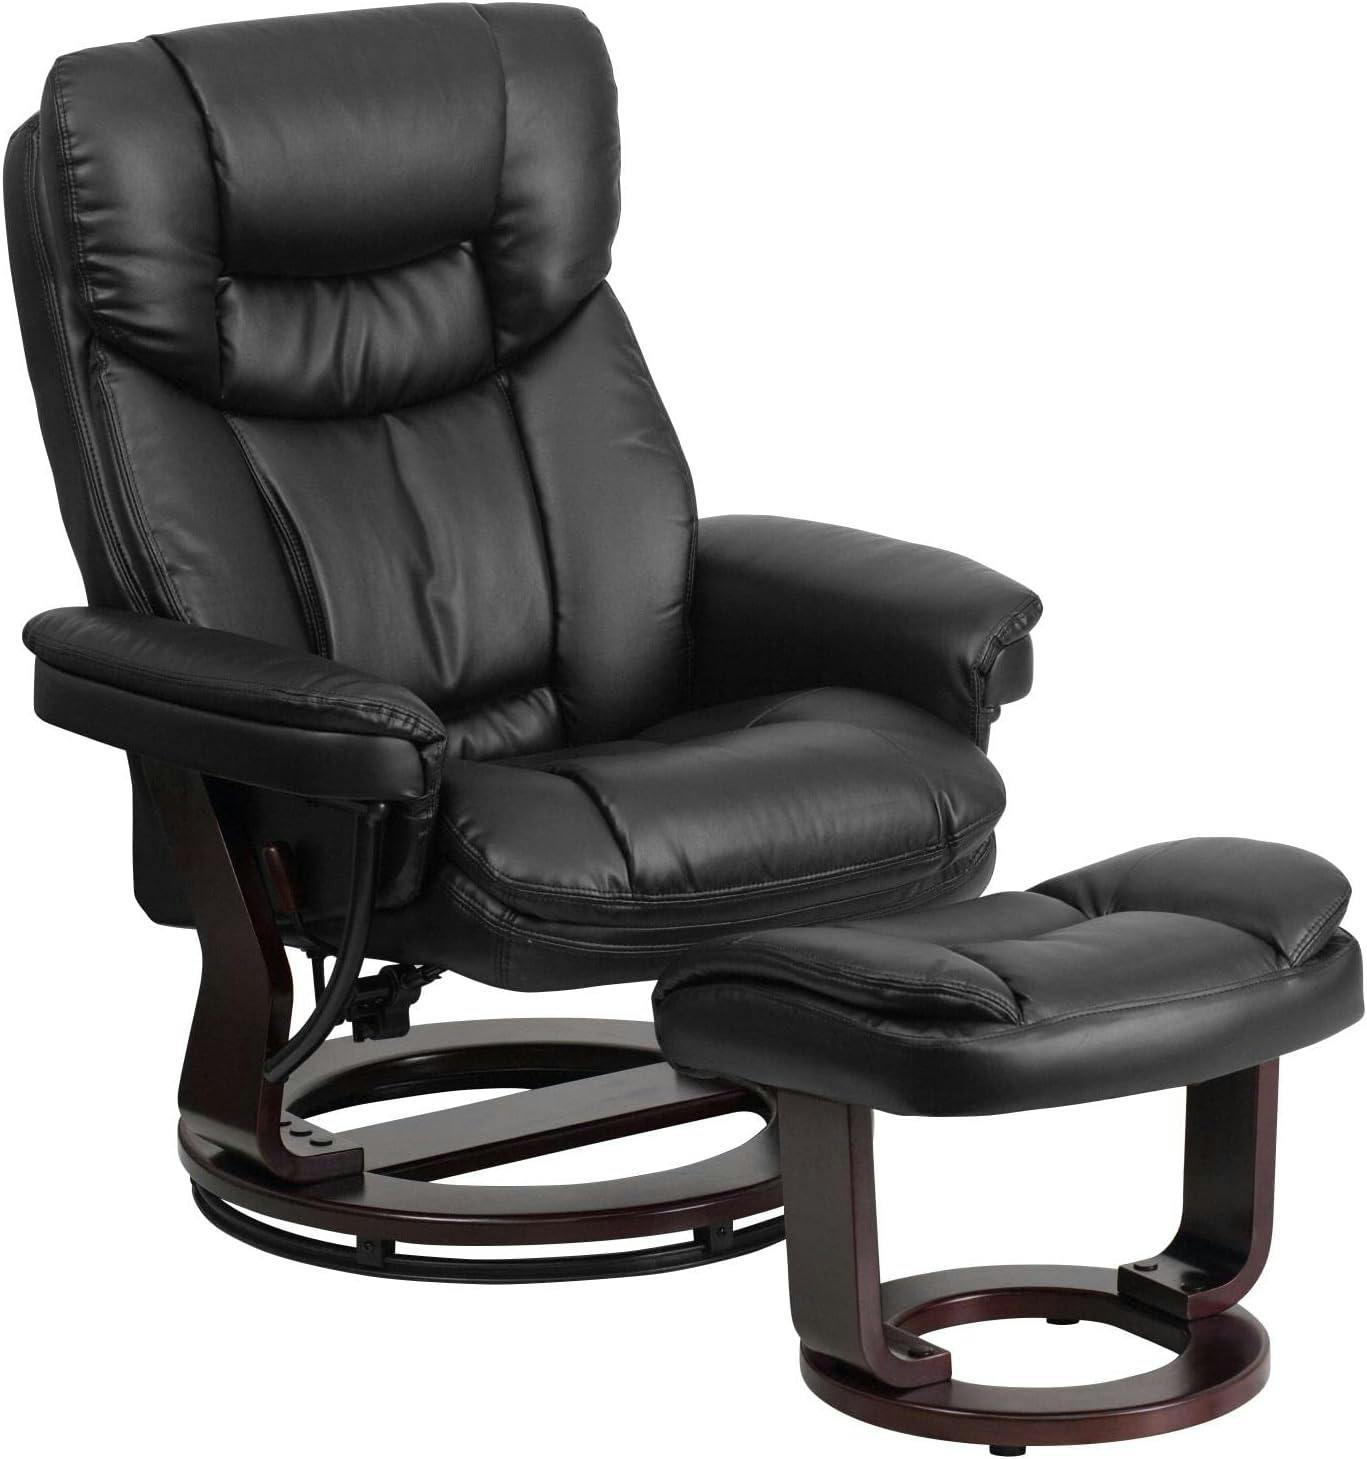 Sustainably Sourced Black Leather Swivel Recliner with Mahogany Wood Base